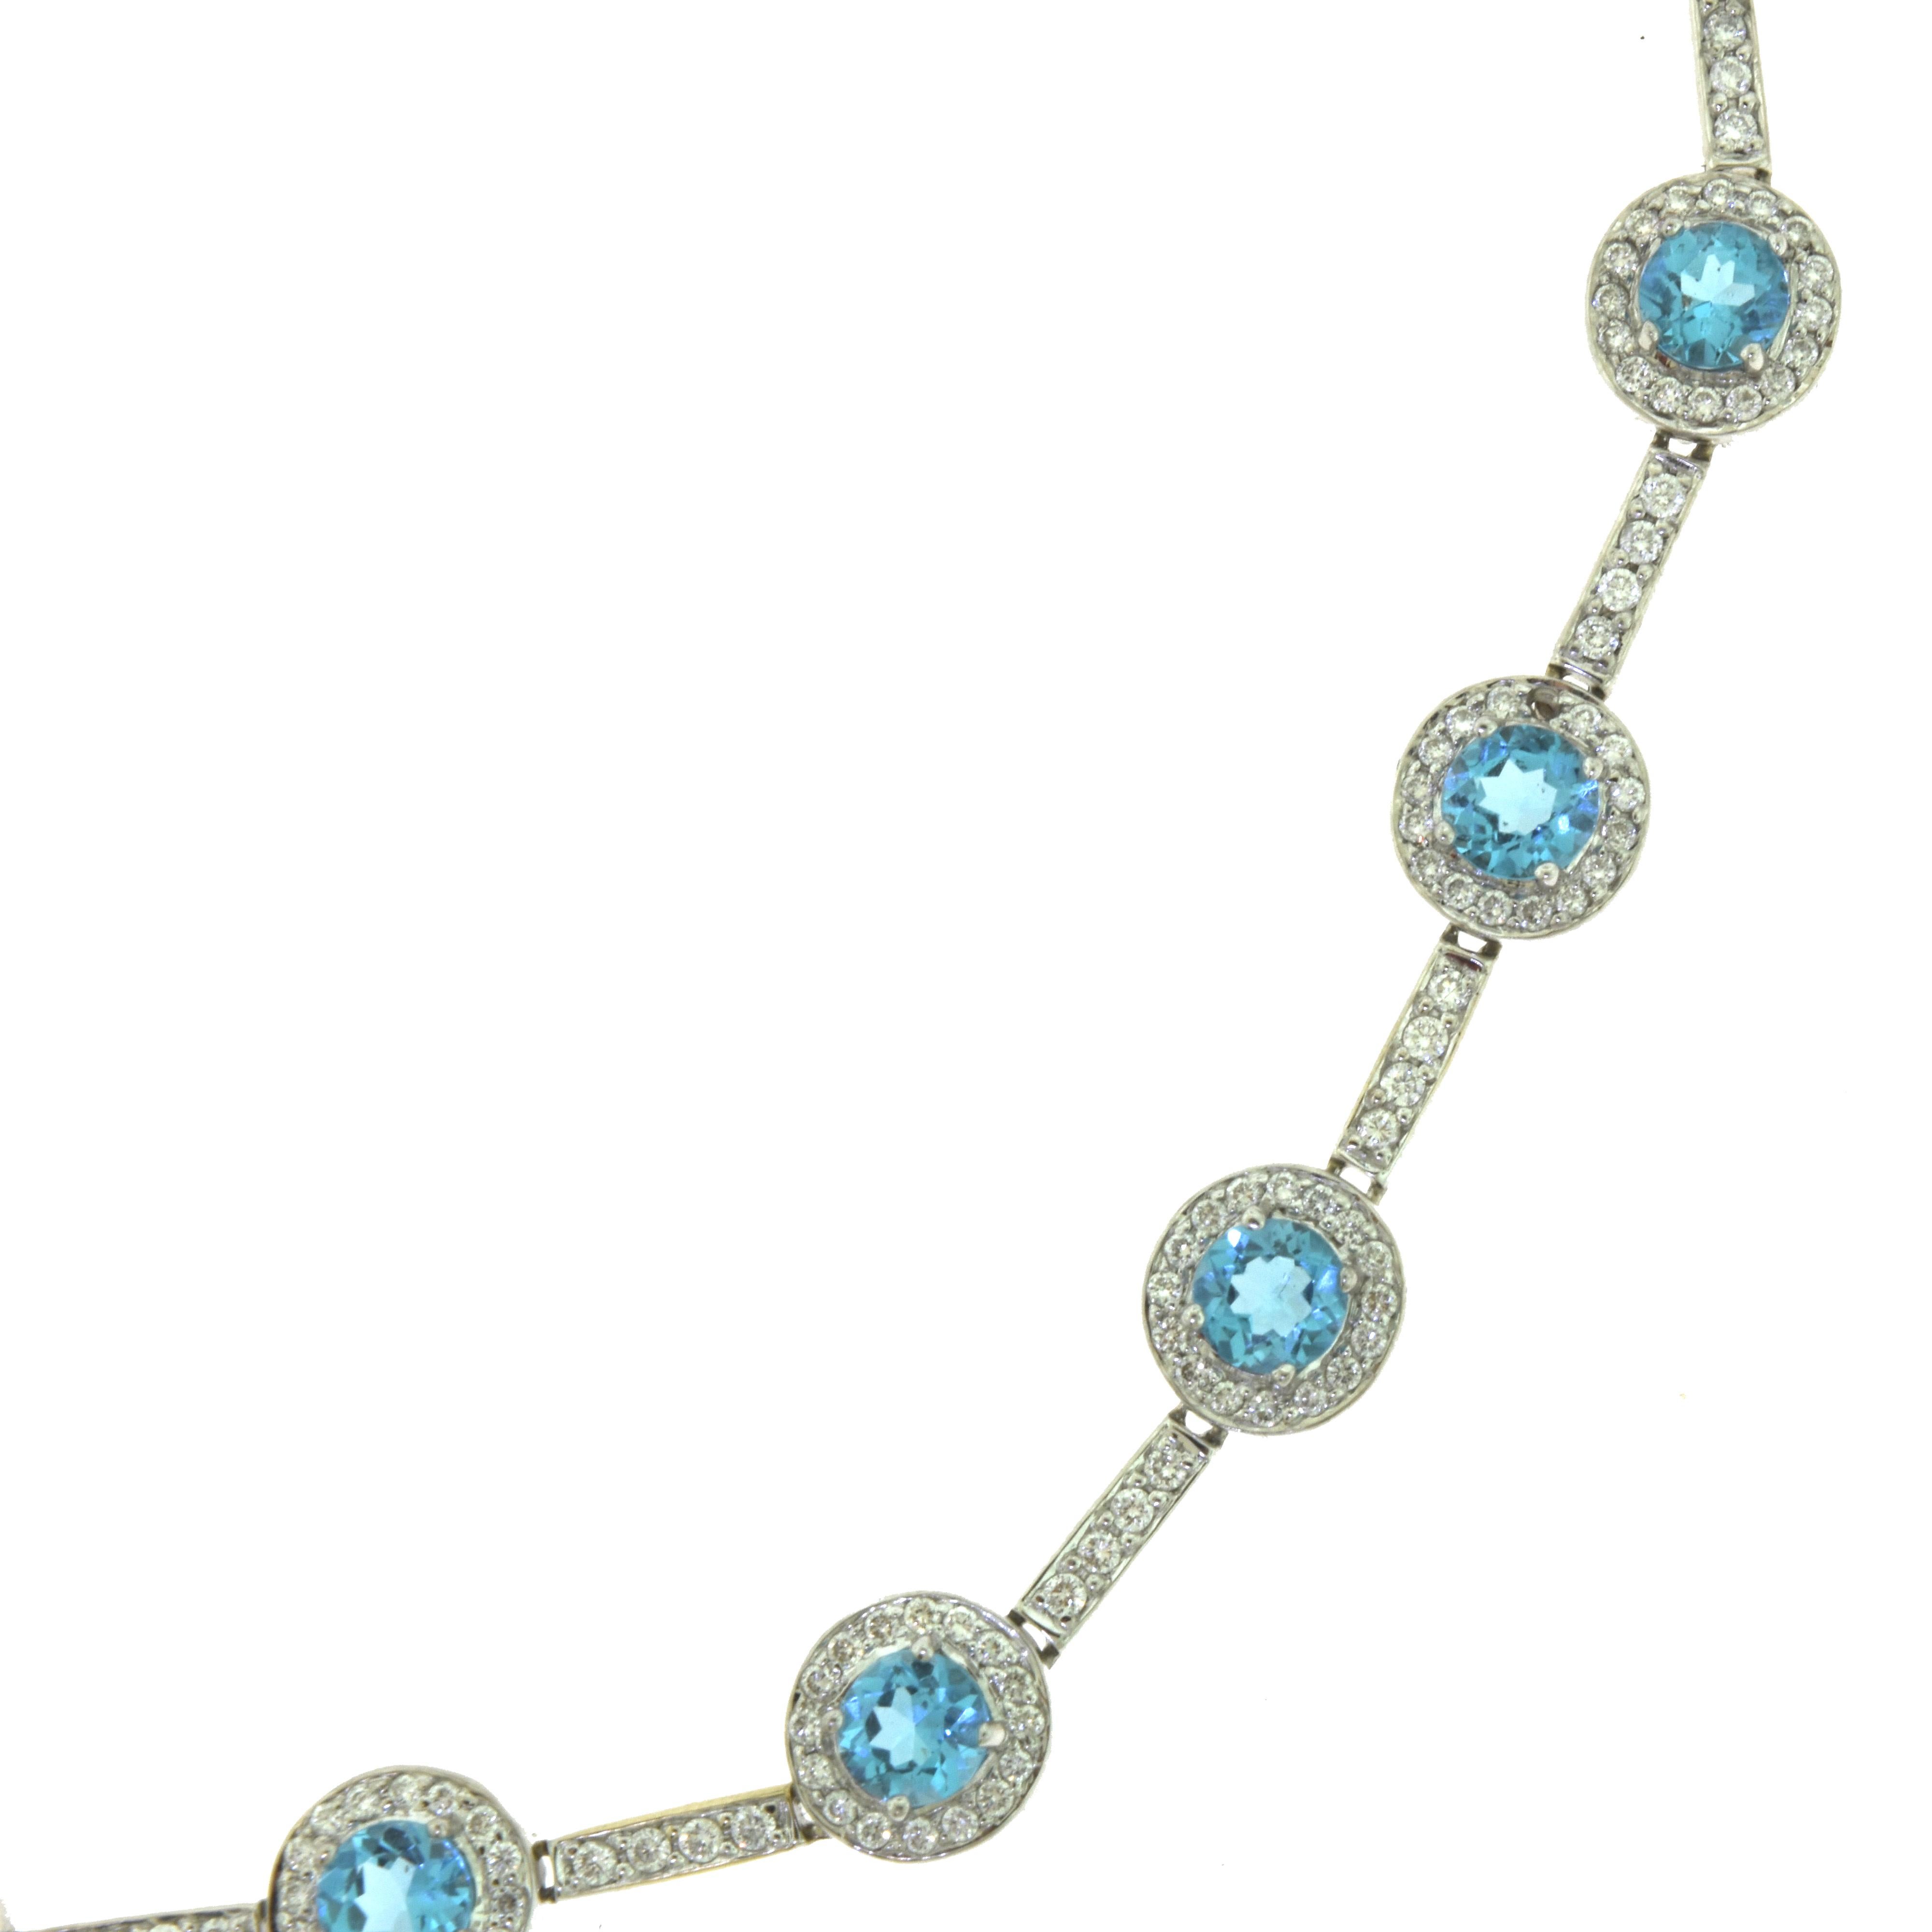 Brilliance Jewels, Miami
Questions? Call Us Anytime!
786,482,8100

Style: Chain Link Necklace 

Metal: White Gold

Metal Purity: 18k

Stones: 21 Round Aquamarine 

                 419 Round Diamonds

Diamond Color: G

Diamond Clarity: